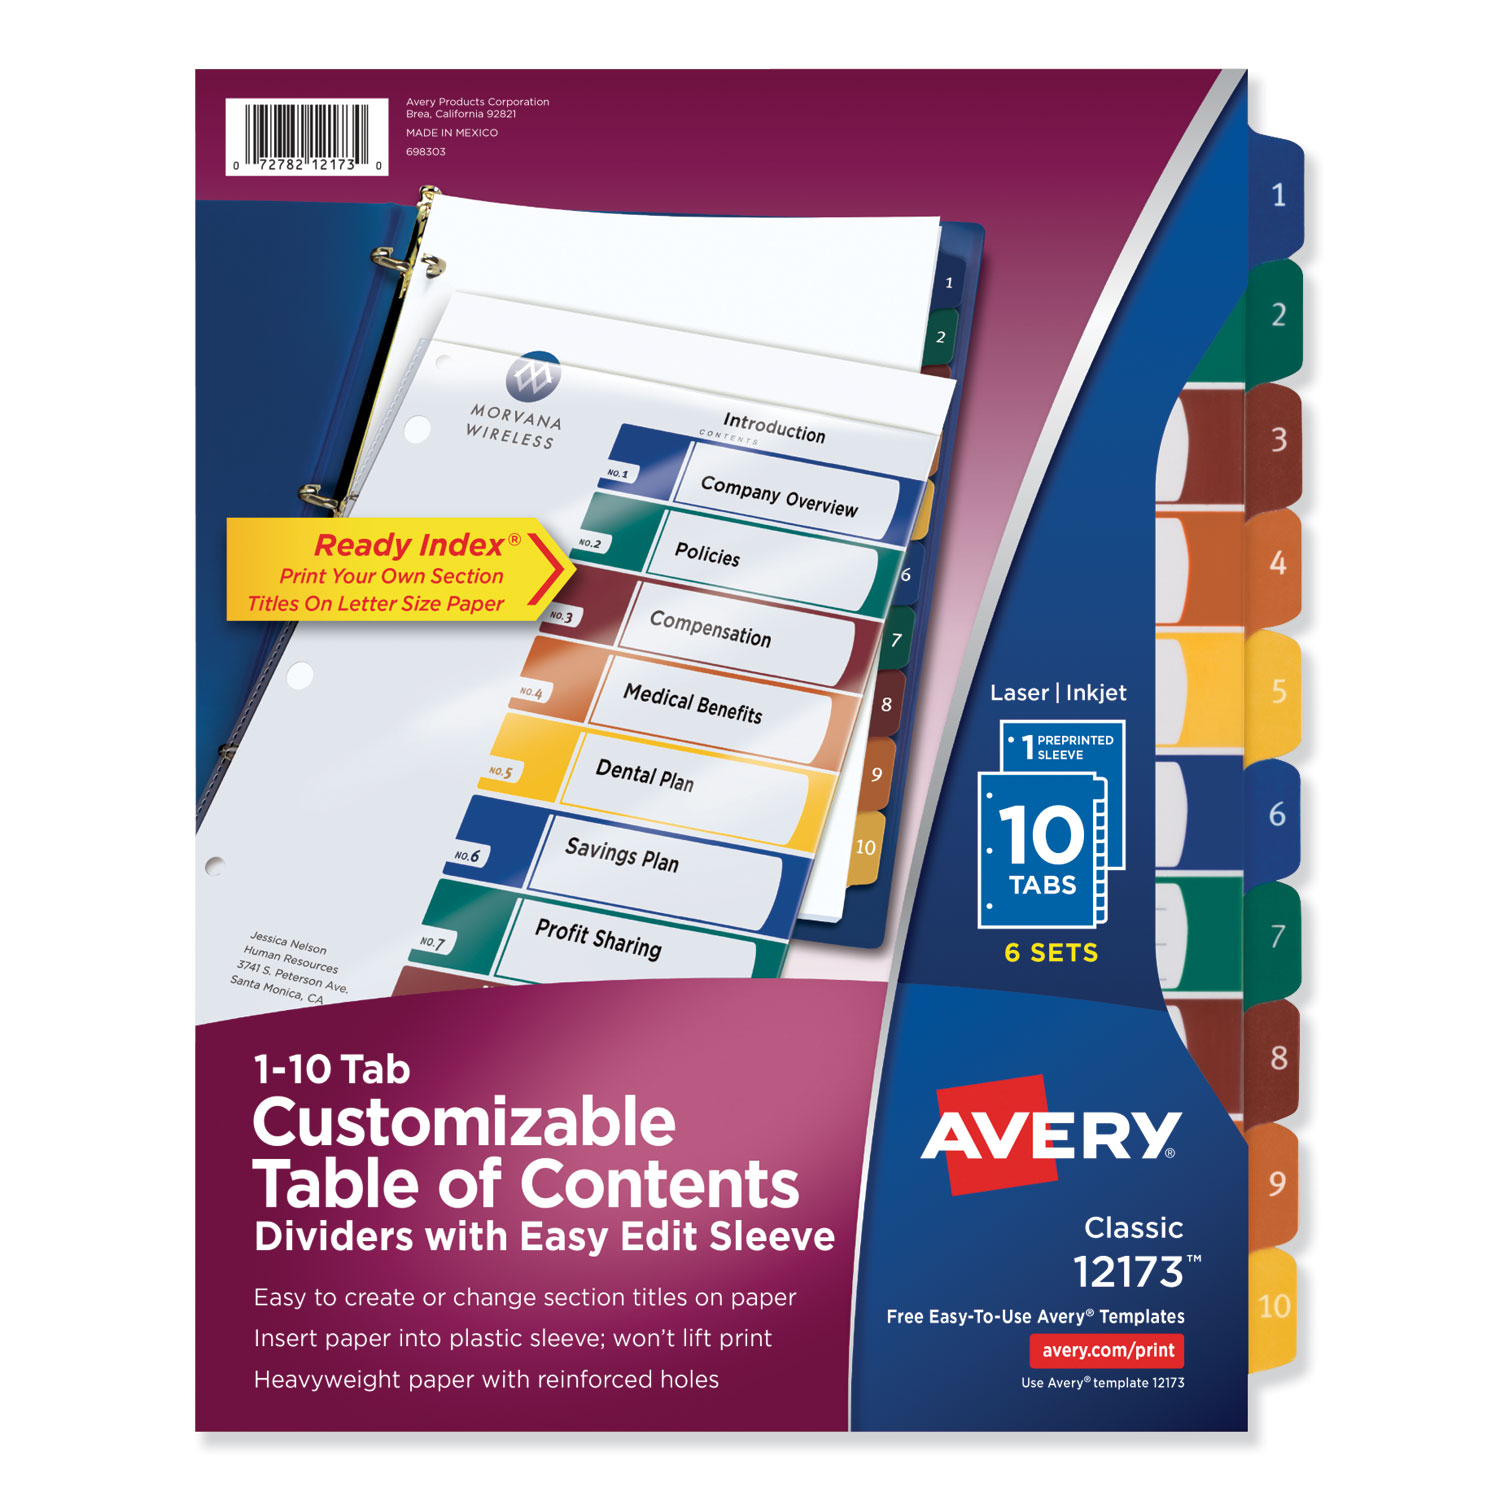  Avery 12173 Ready Index Customizable Table of Contents, Asst Dividers, 10-Tab, Ltr, 6 Sets (AVE12173) 